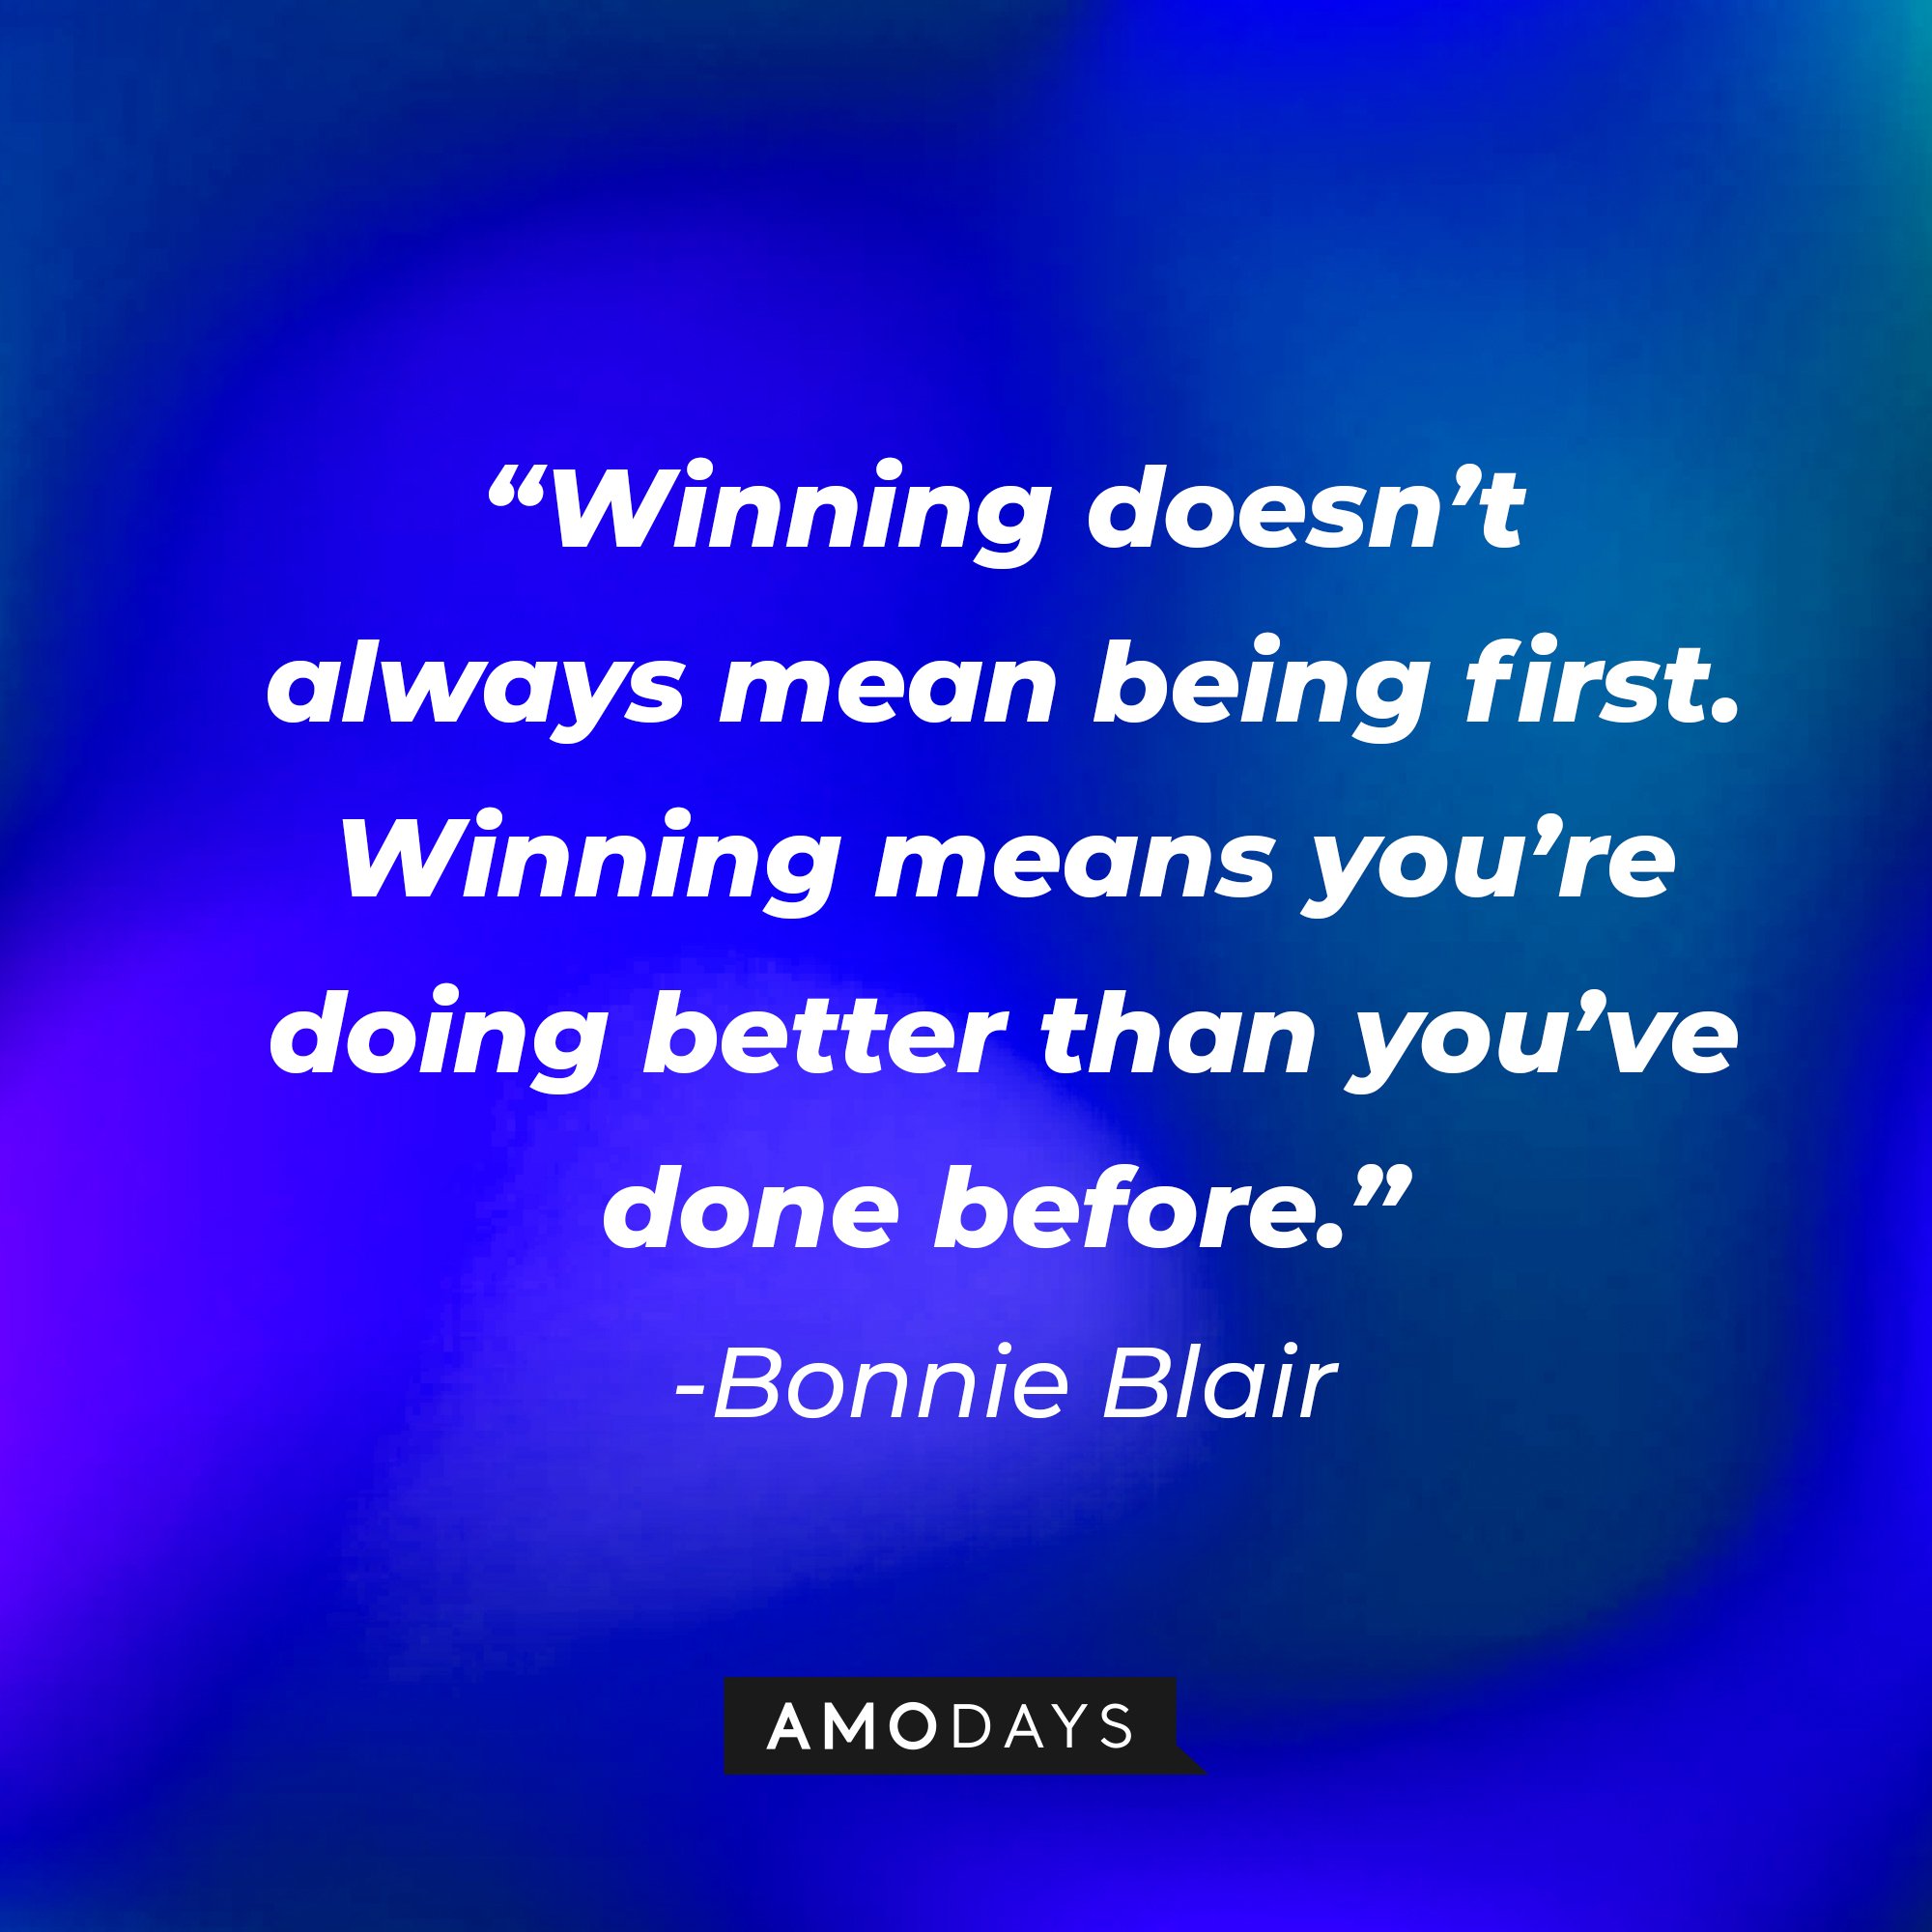 Bonnie Blair’s quote: “Winning doesn’t always mean being first. Winning means you’re doing better than you’ve done before.”  | Image: AmoDays